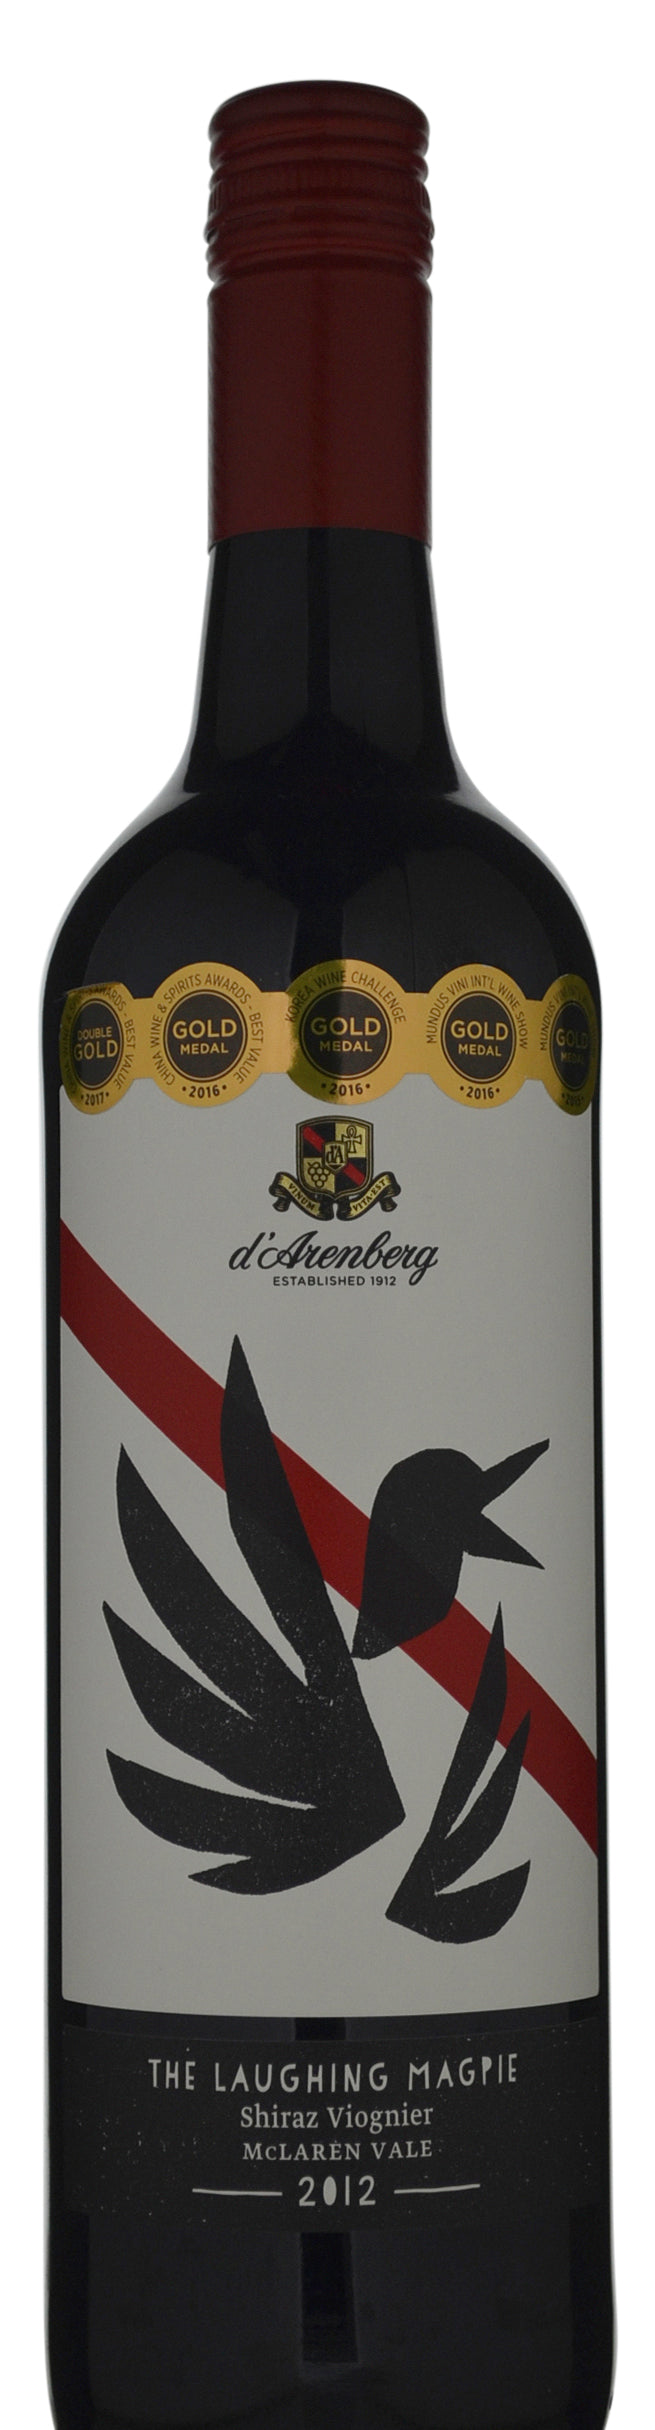 d'Arenberg The Laughing Magpie Shiraz Viognier 2012